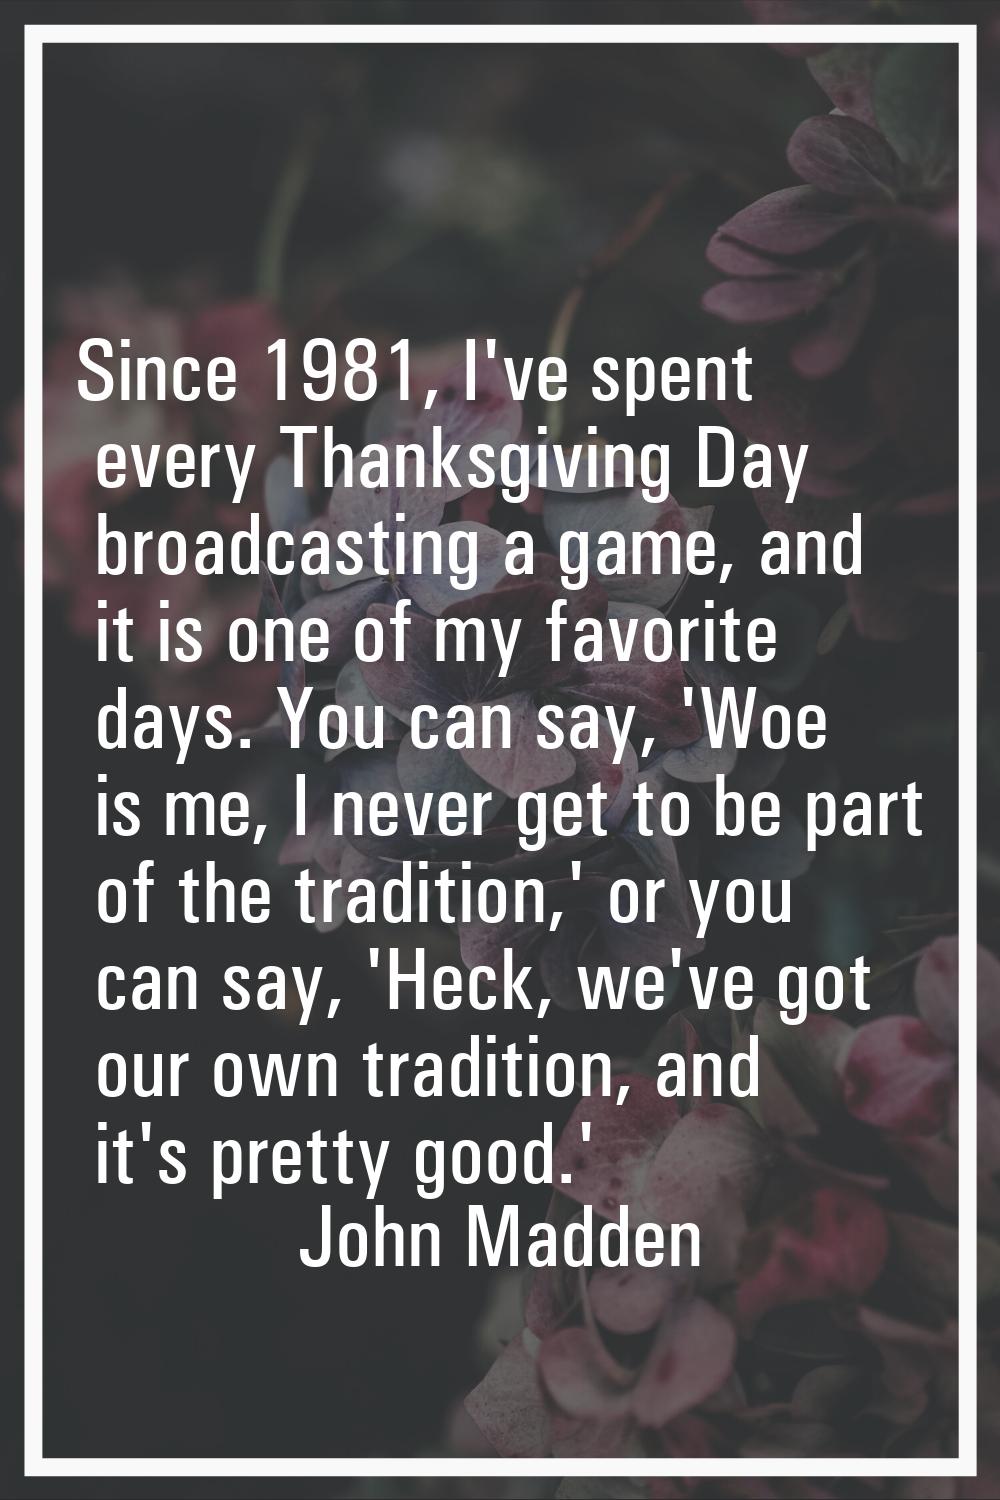 Since 1981, I've spent every Thanksgiving Day broadcasting a game, and it is one of my favorite day